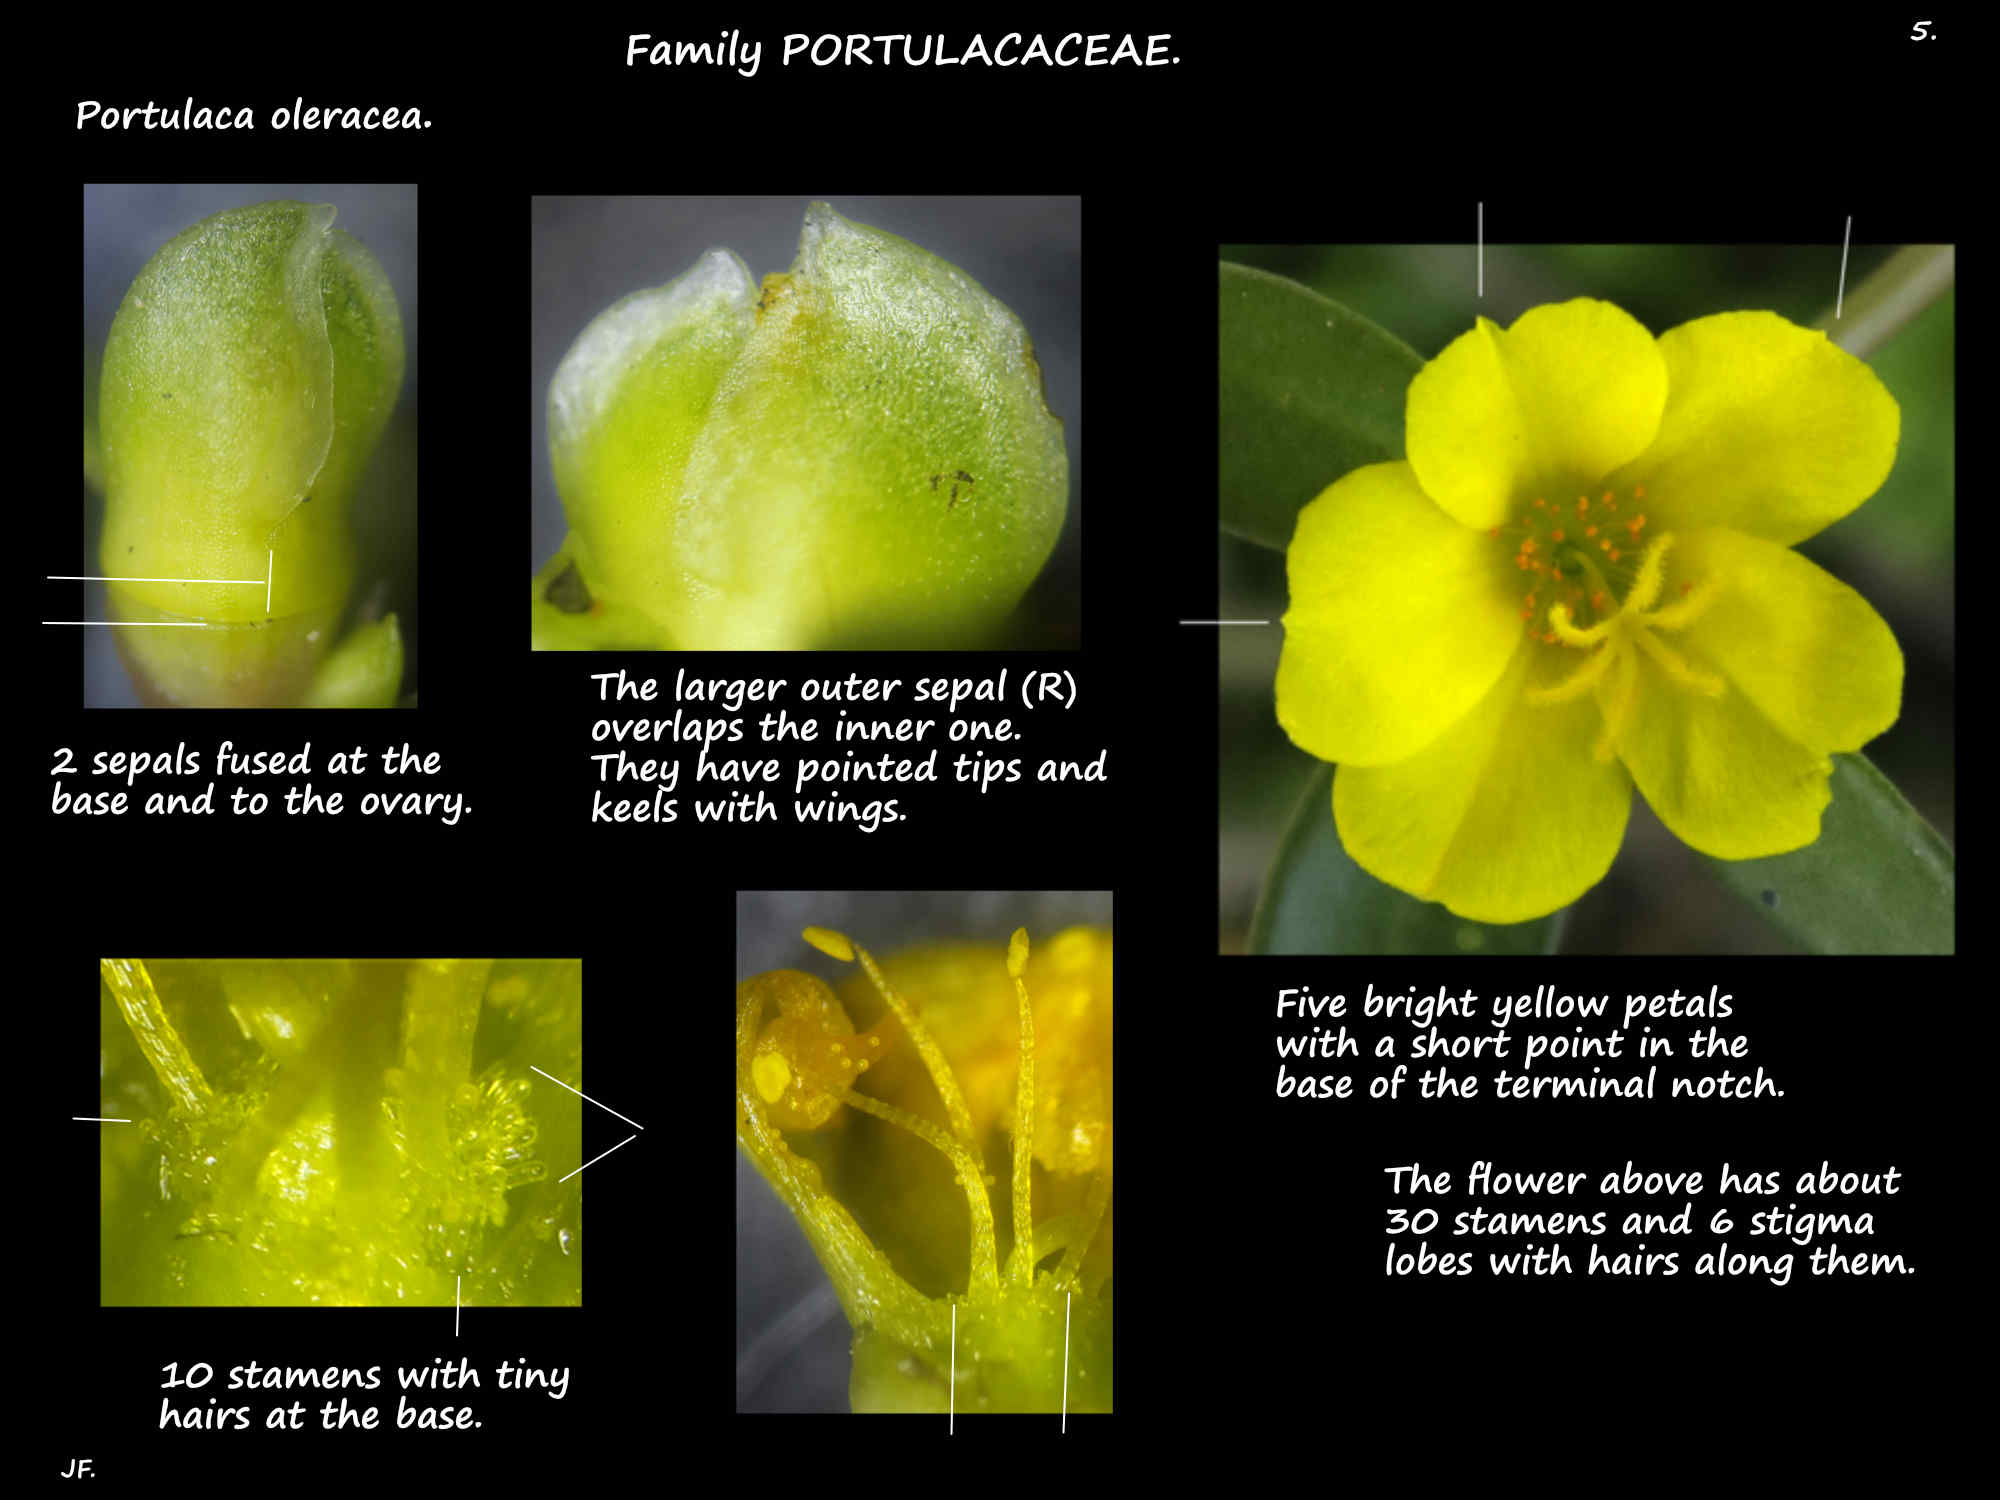 5 A yellow Portulace oleracea flower & hairs at the stamen bases